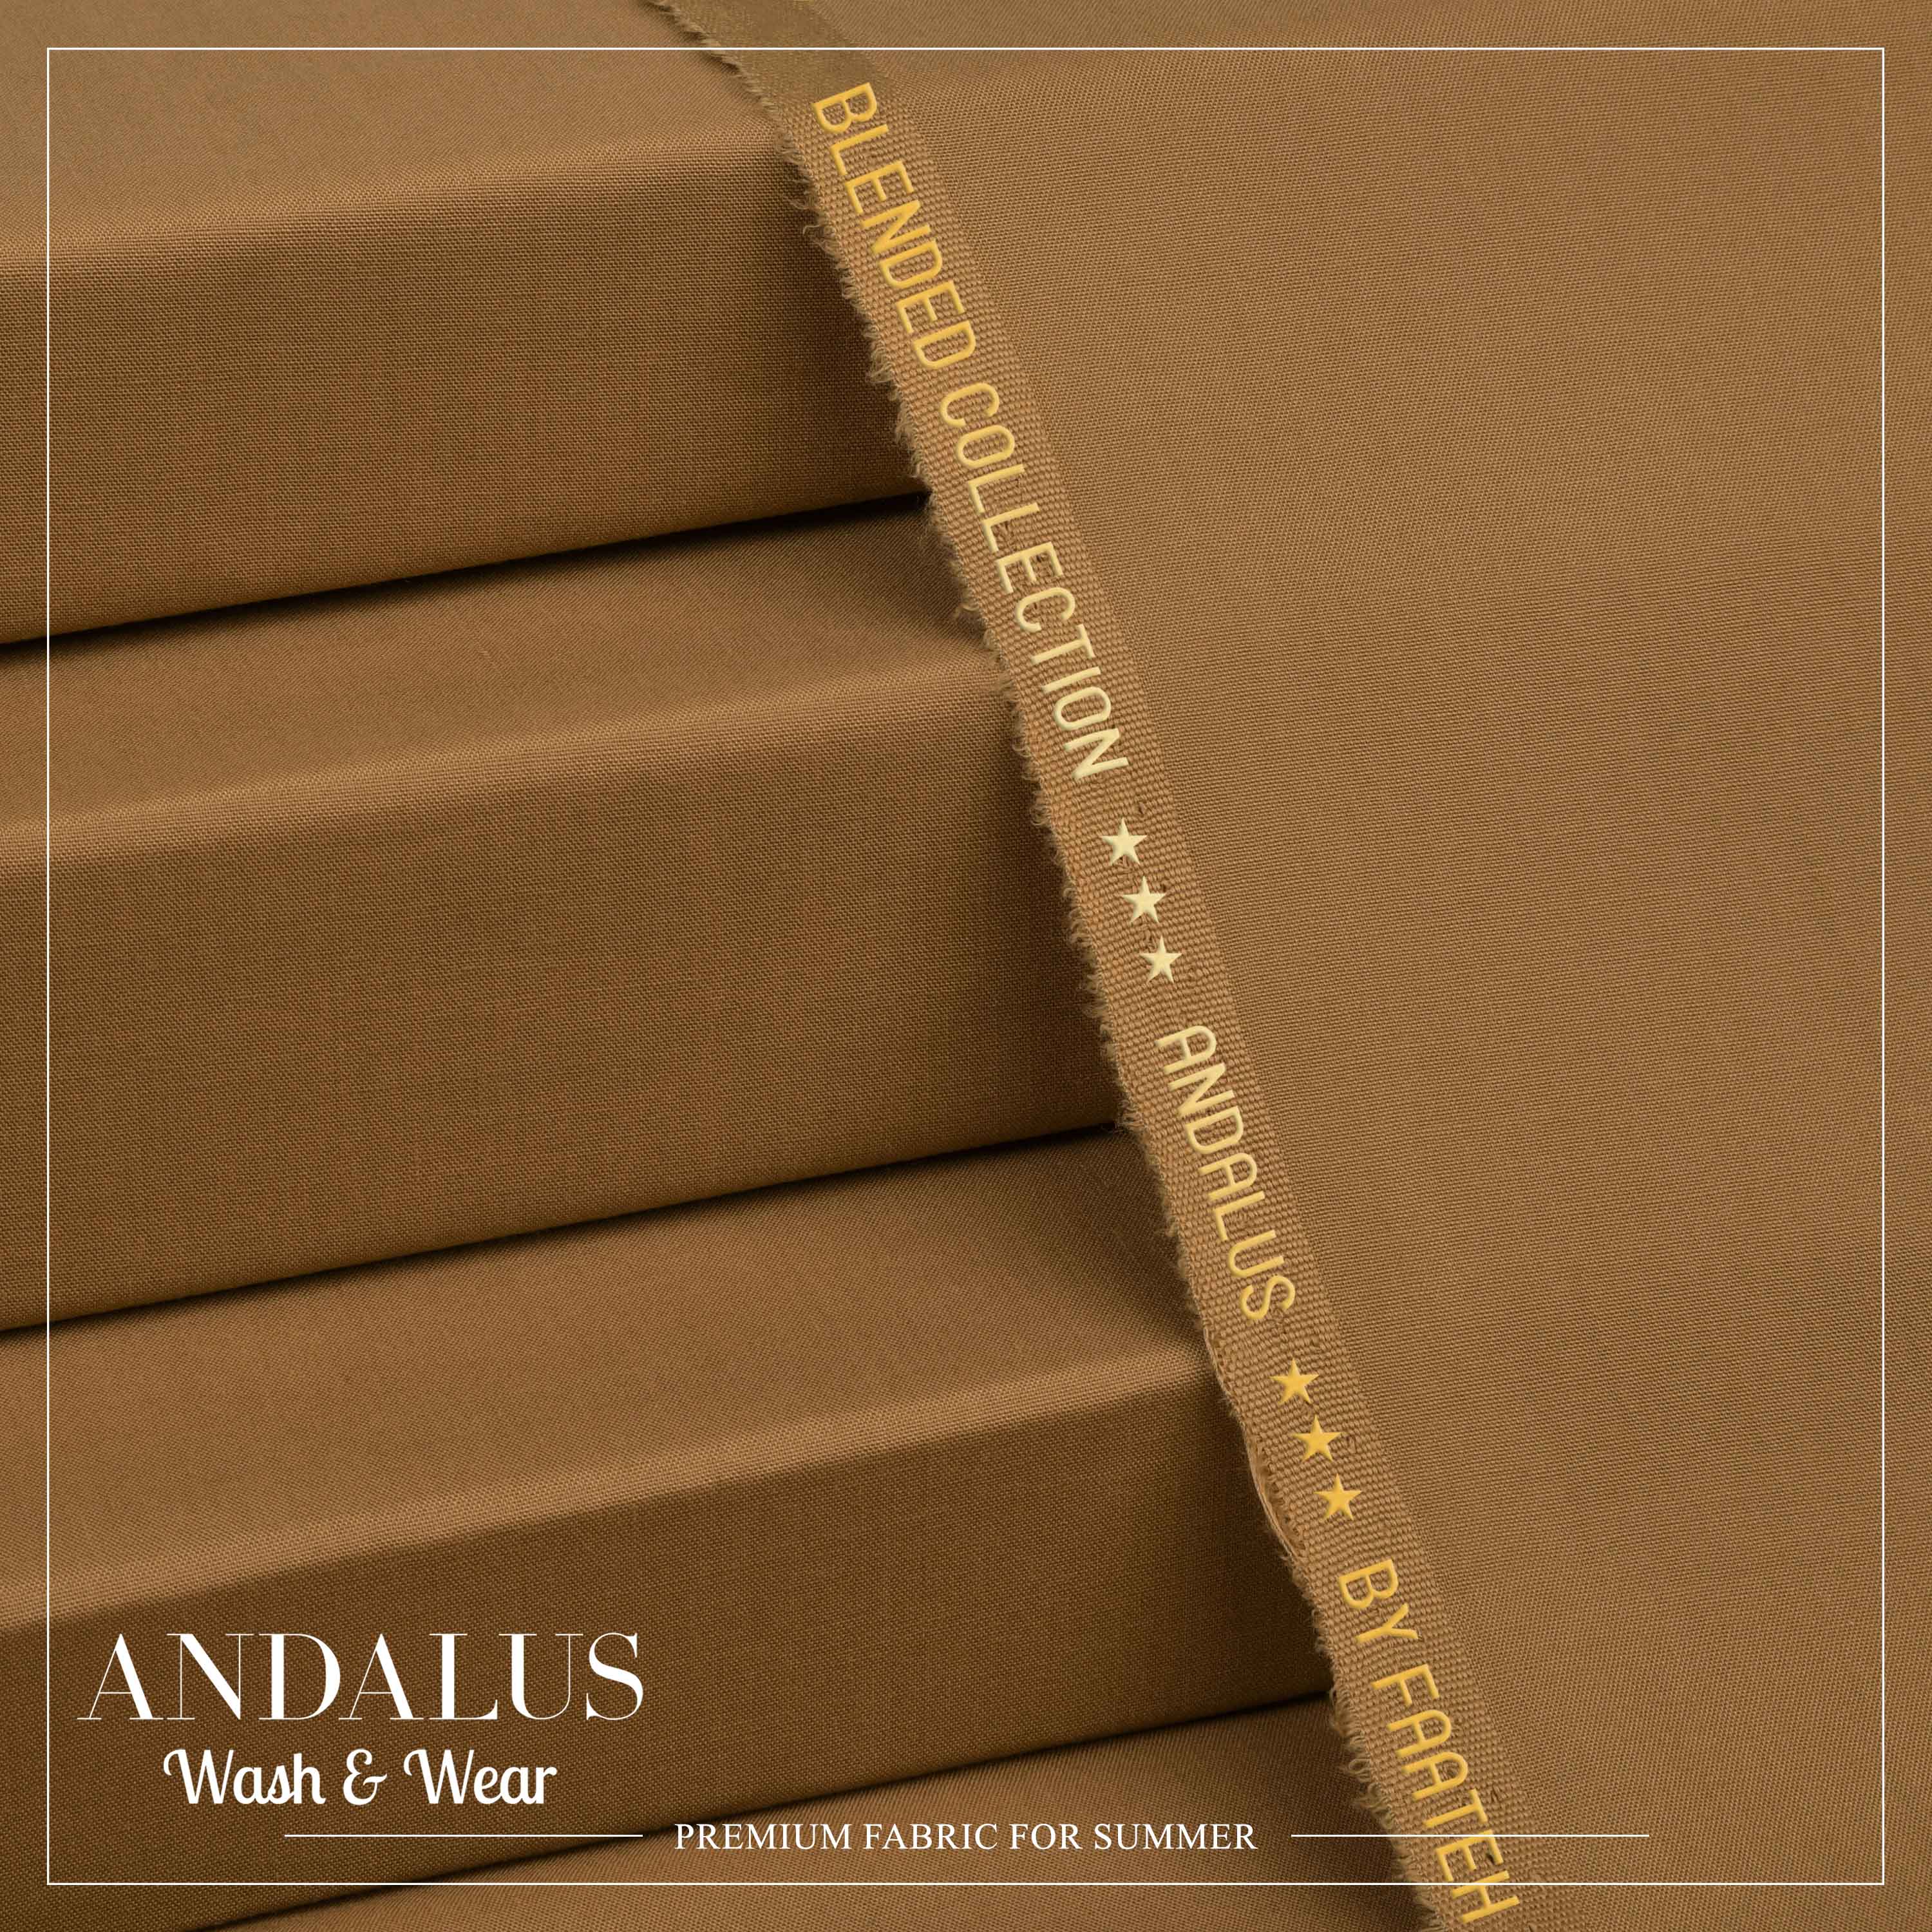 Camel - Andalus - Wash & Wear Fabric